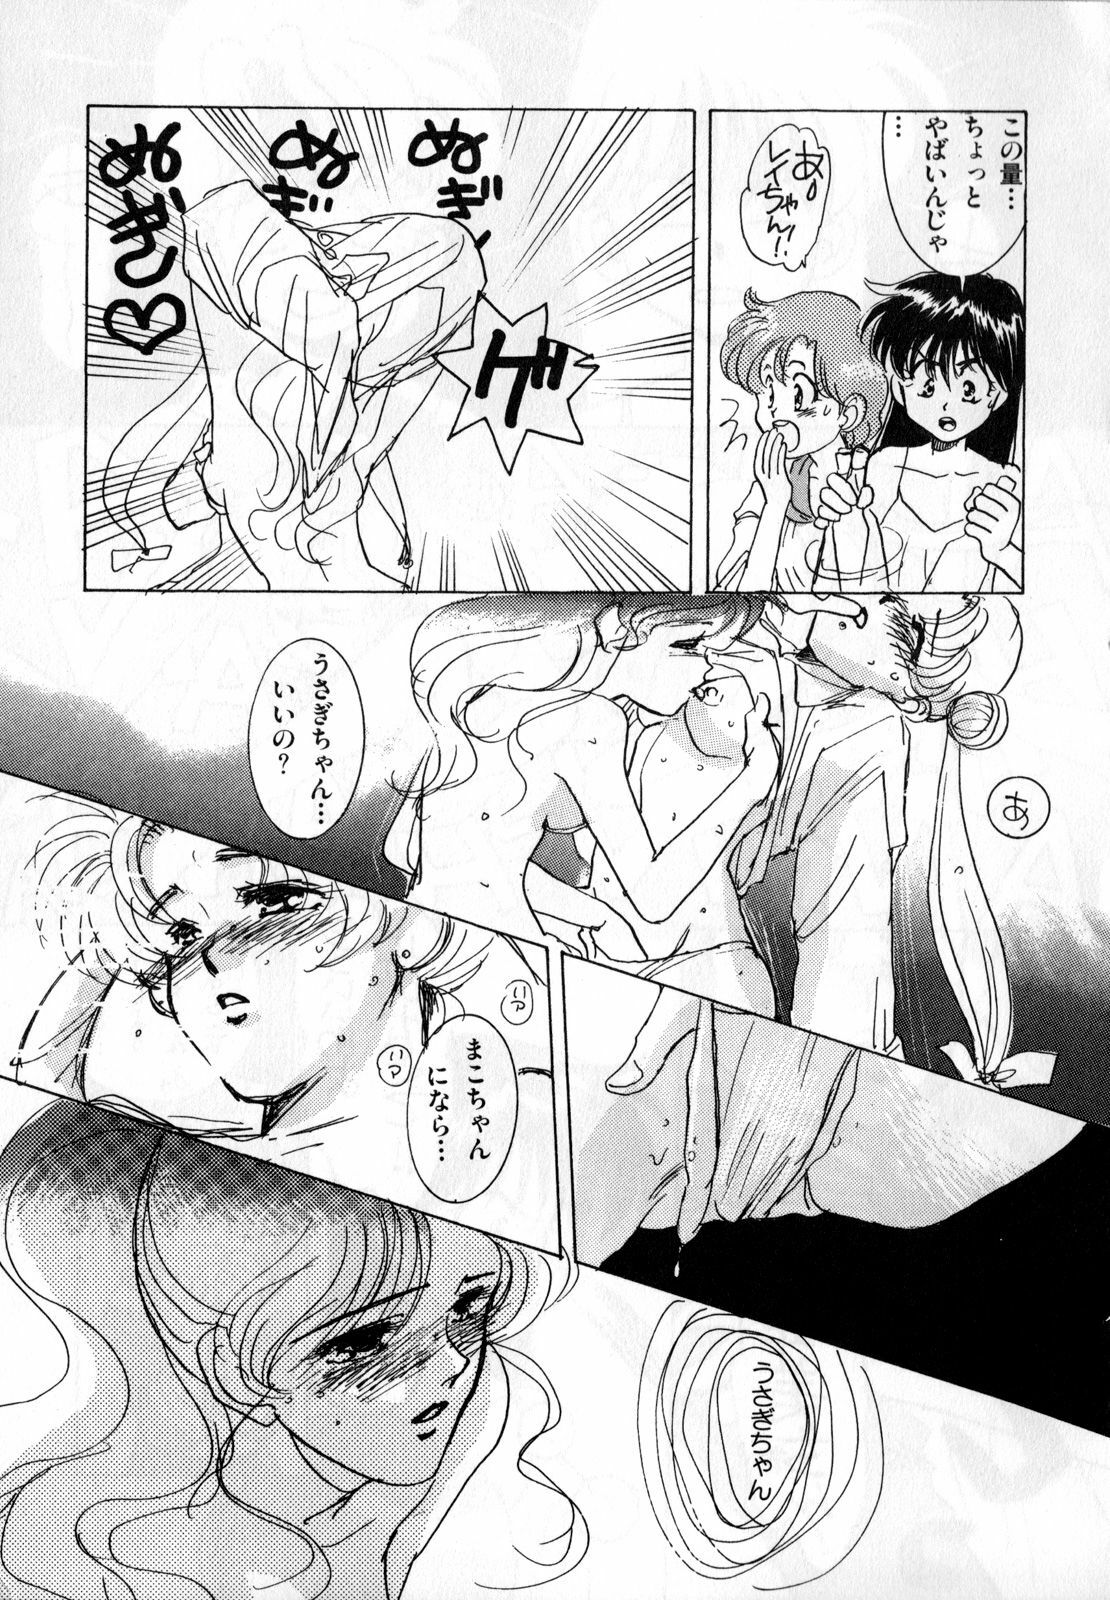 [Anthology] Lunatic Party 1 (Sailor Moon) page 36 full